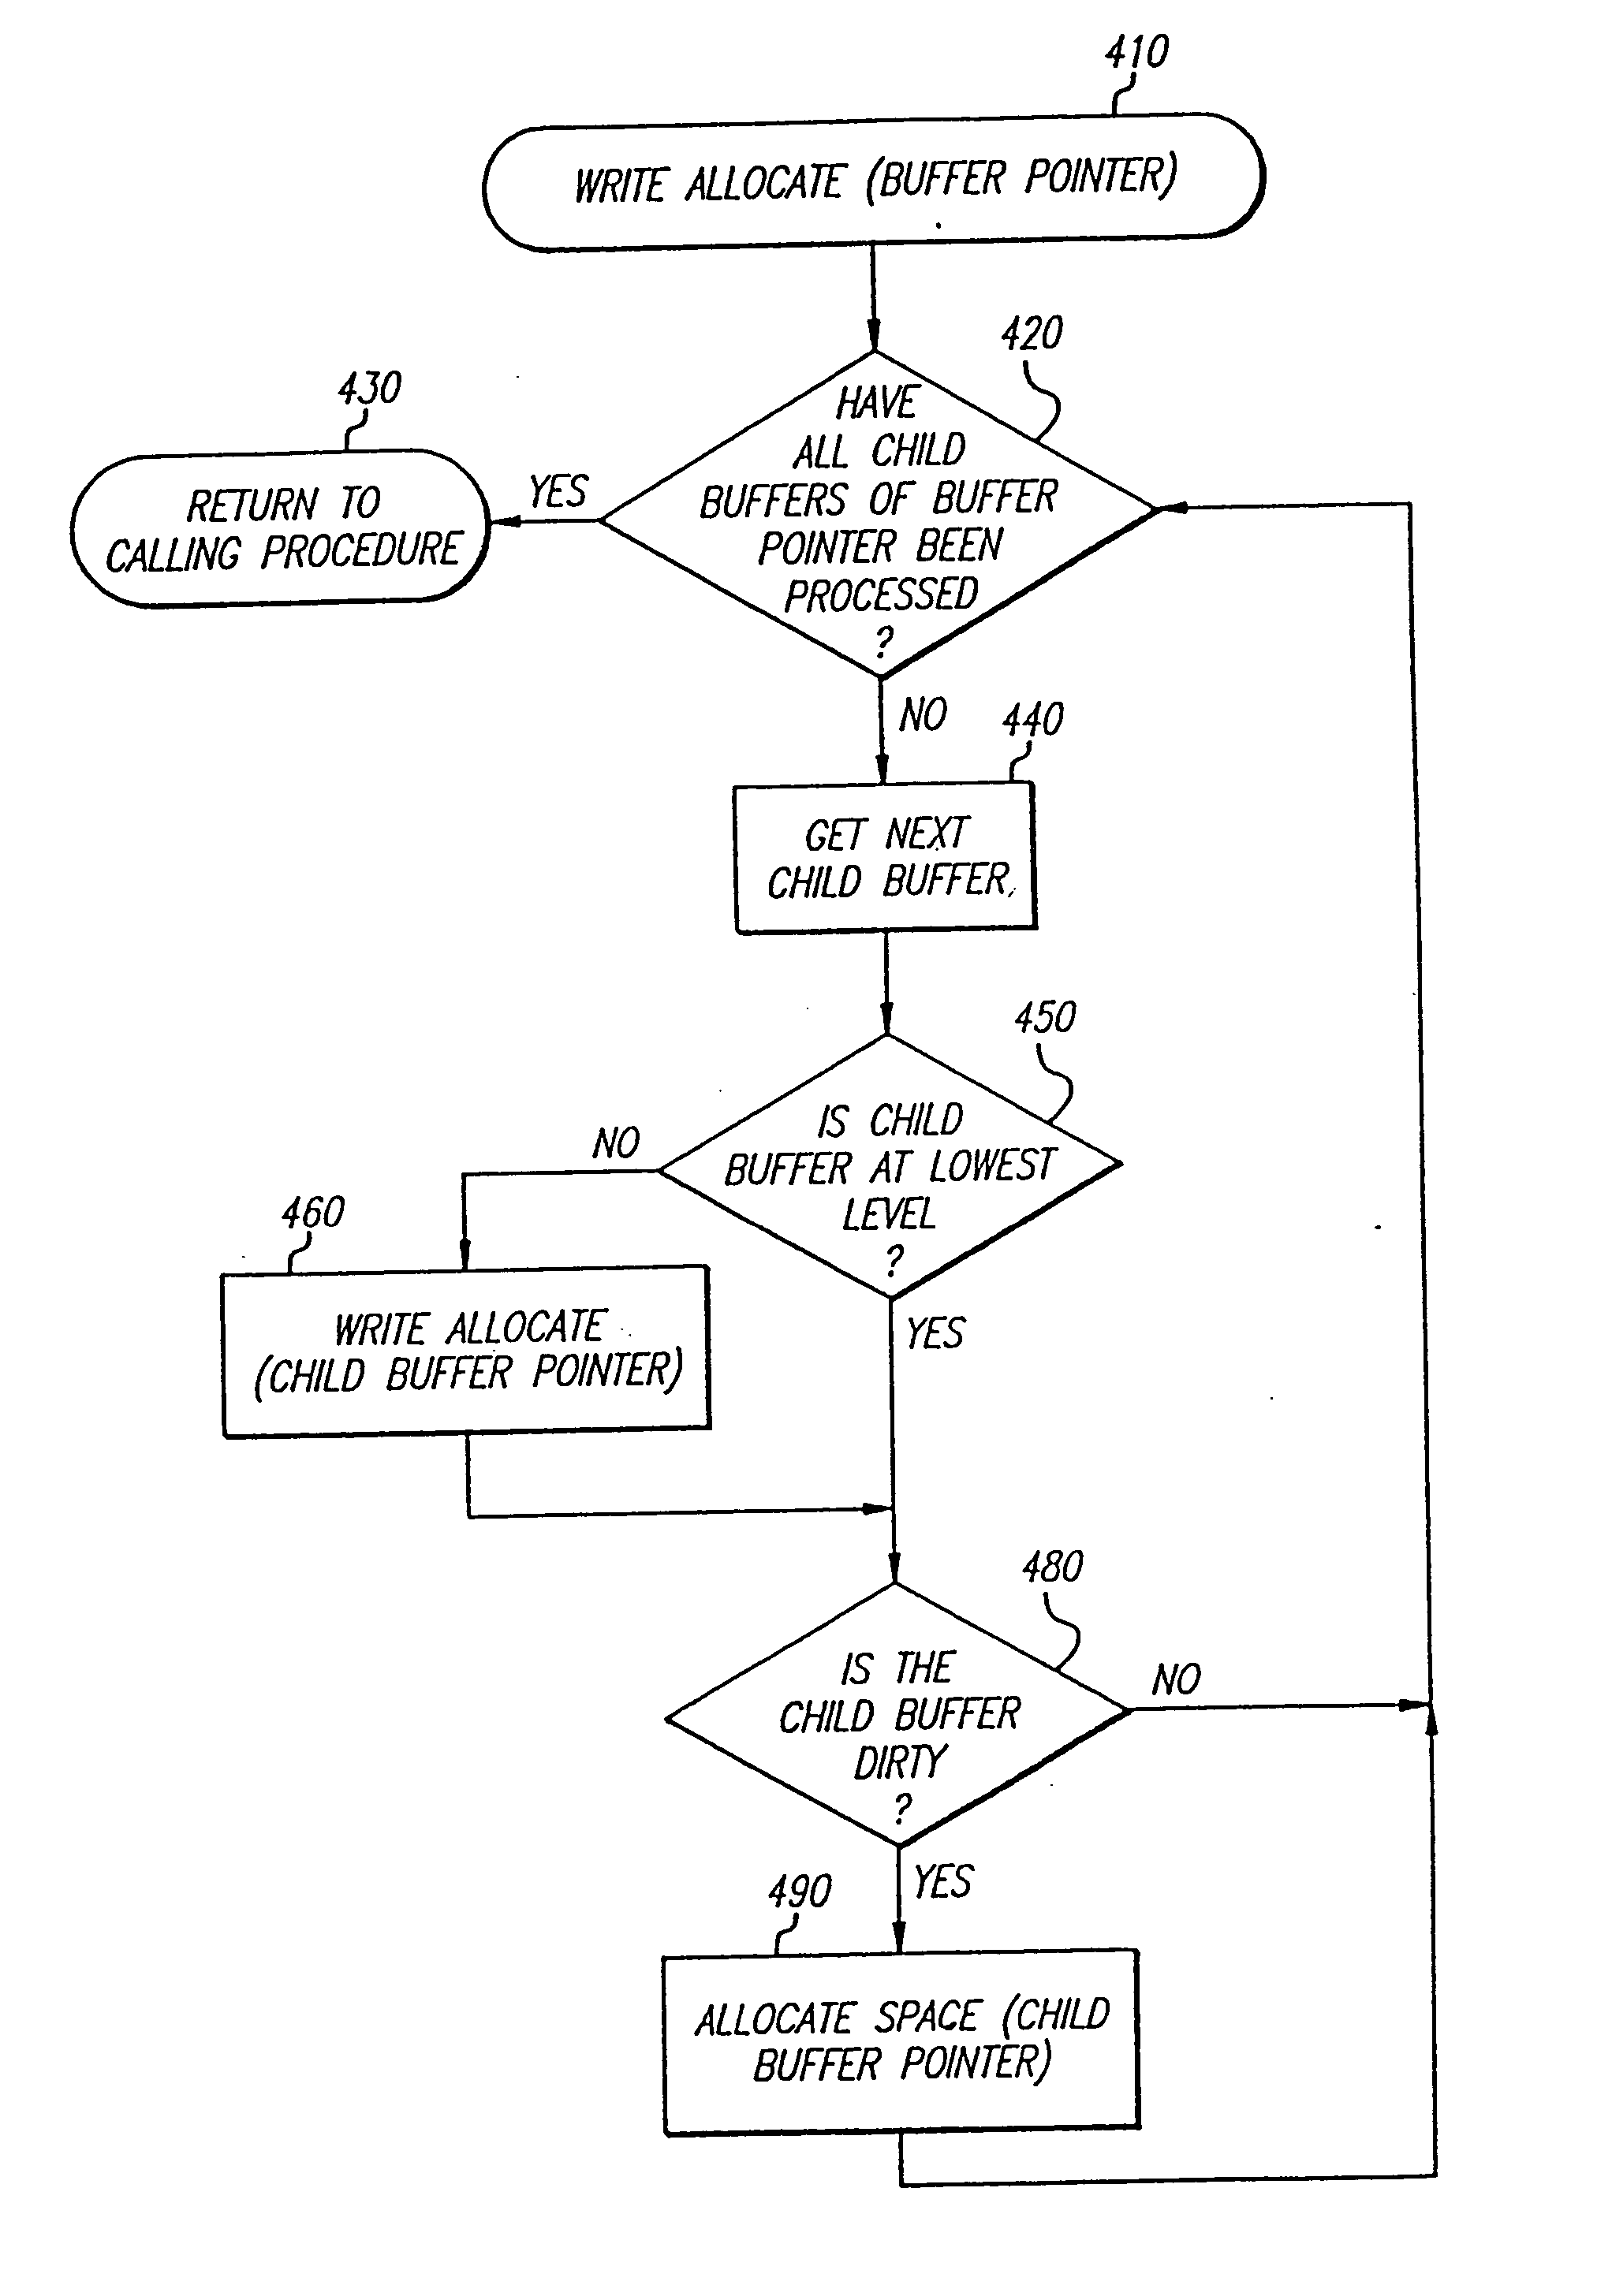 Allocating files in a file system integrated with a raid disk sub-system